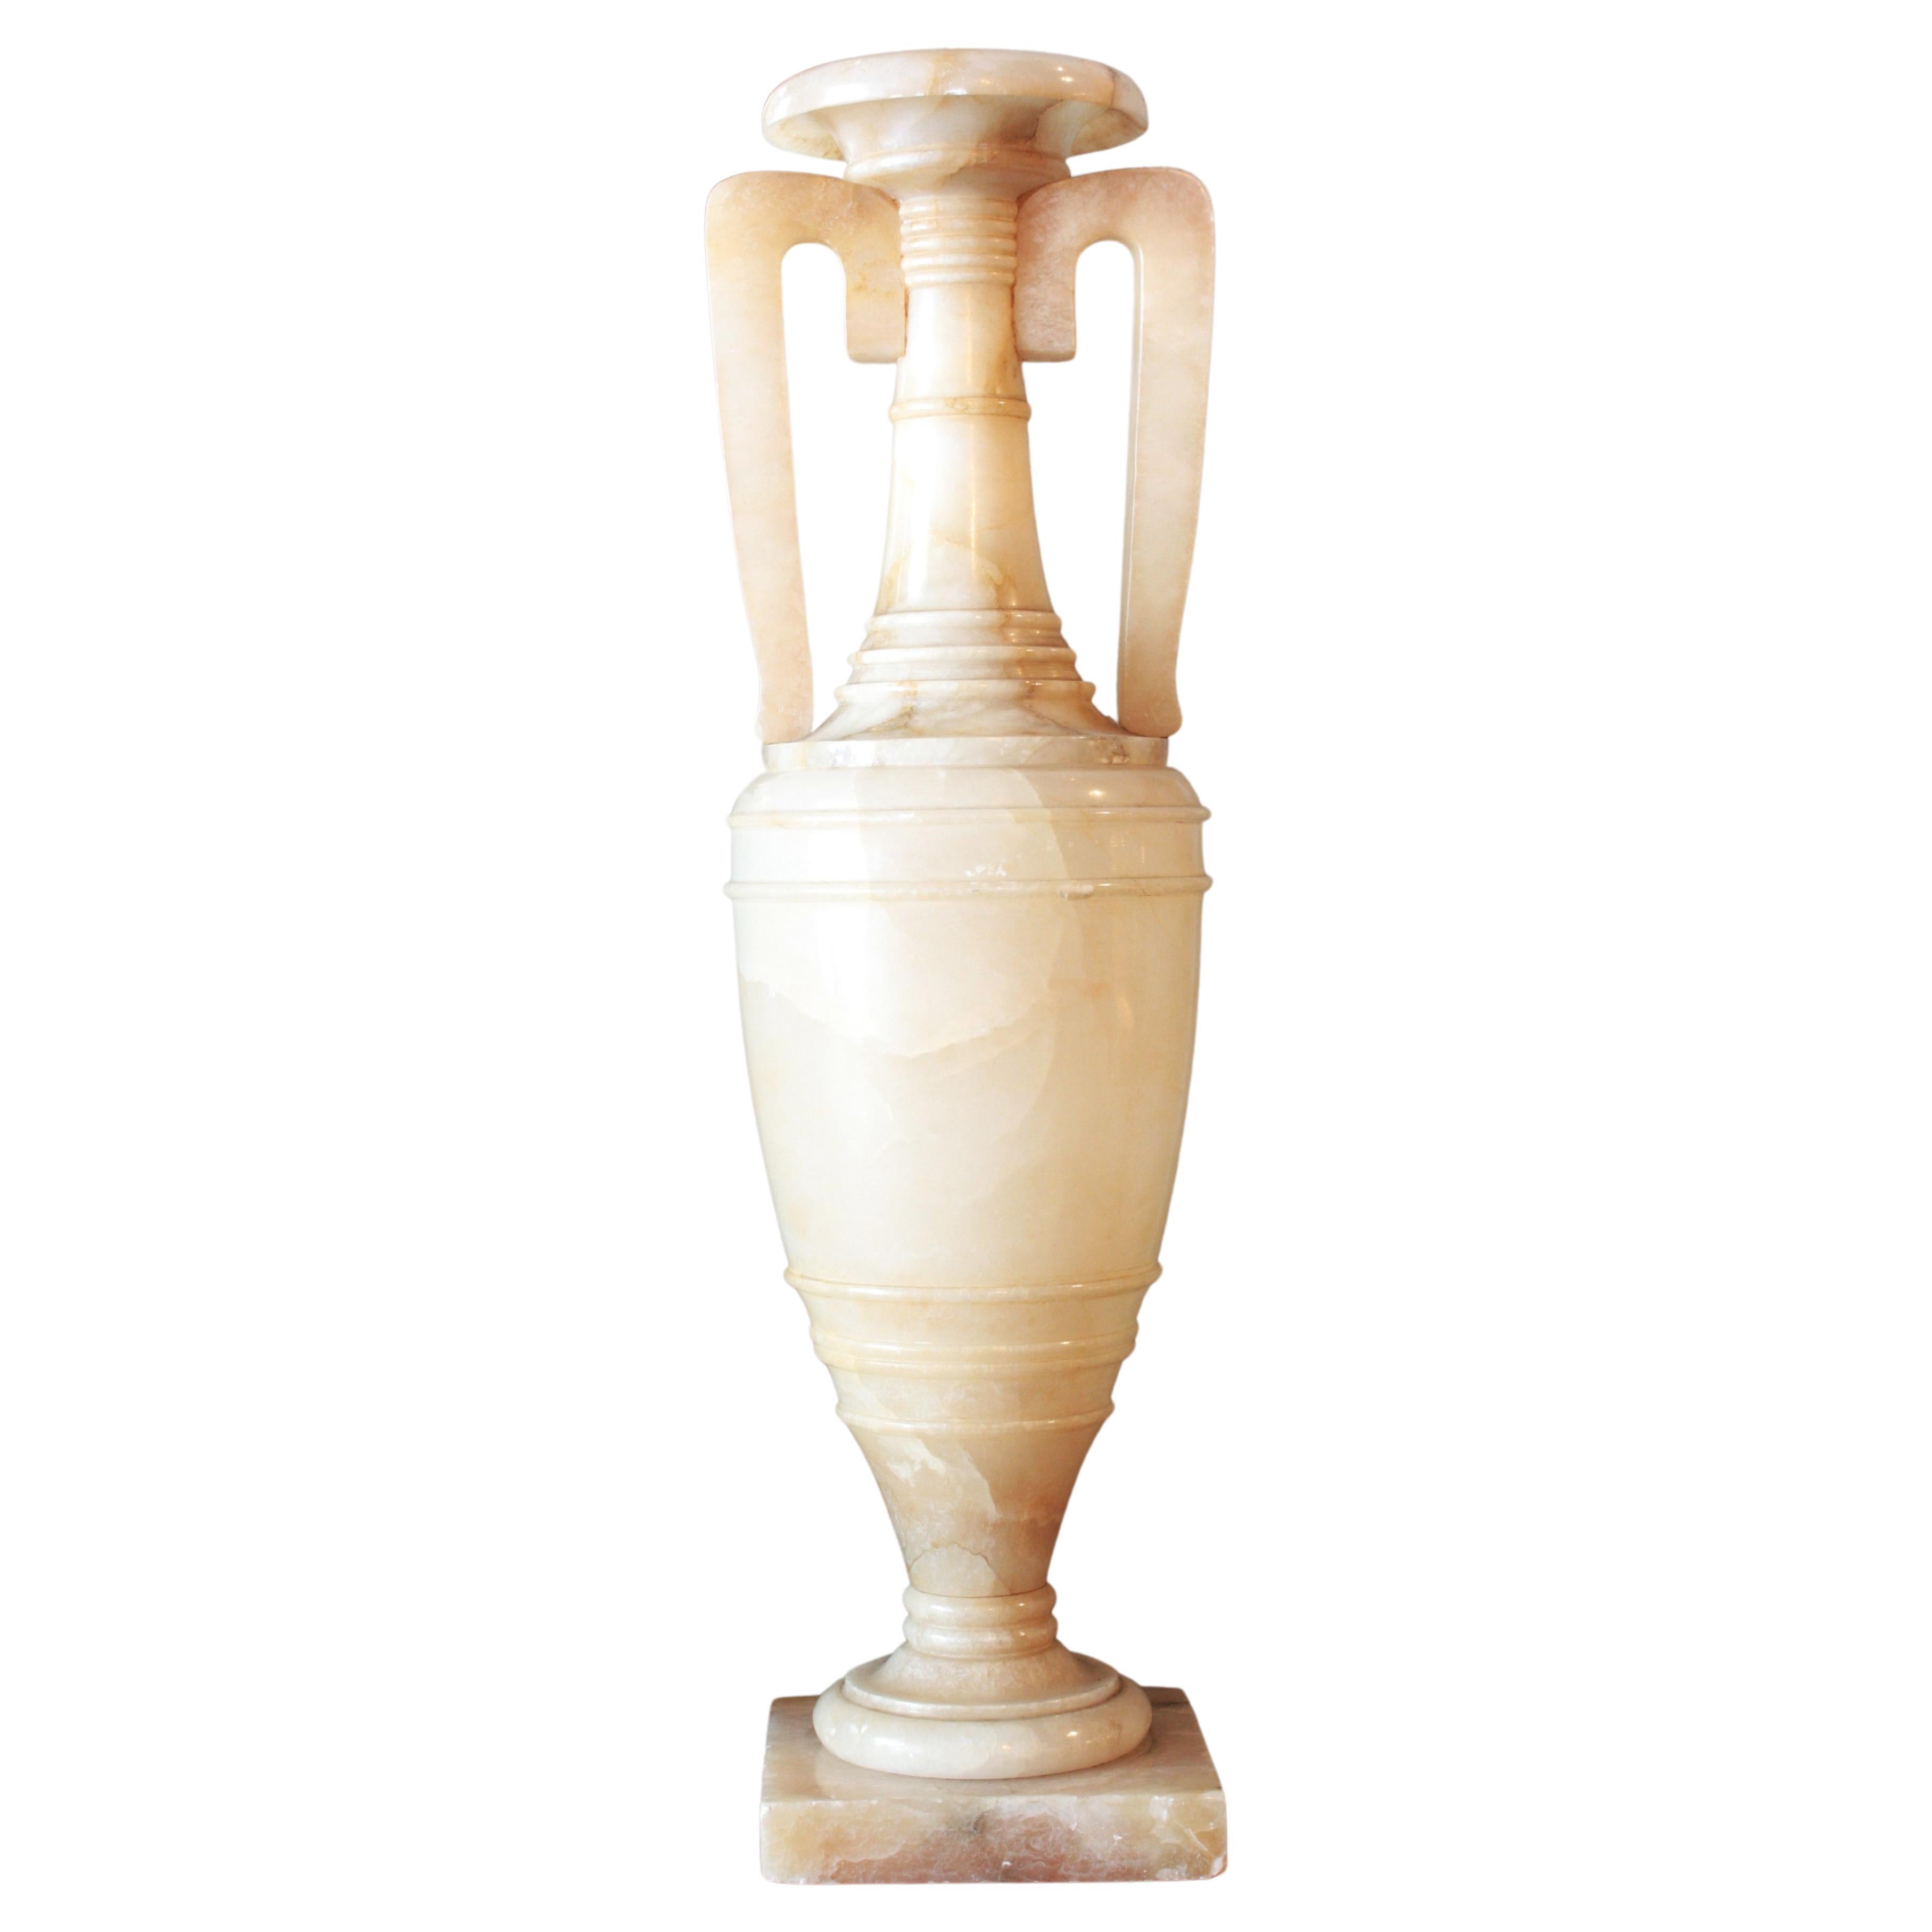 Neoclassical  Alabaster Urn Lamp with Handles & Amphora Shape